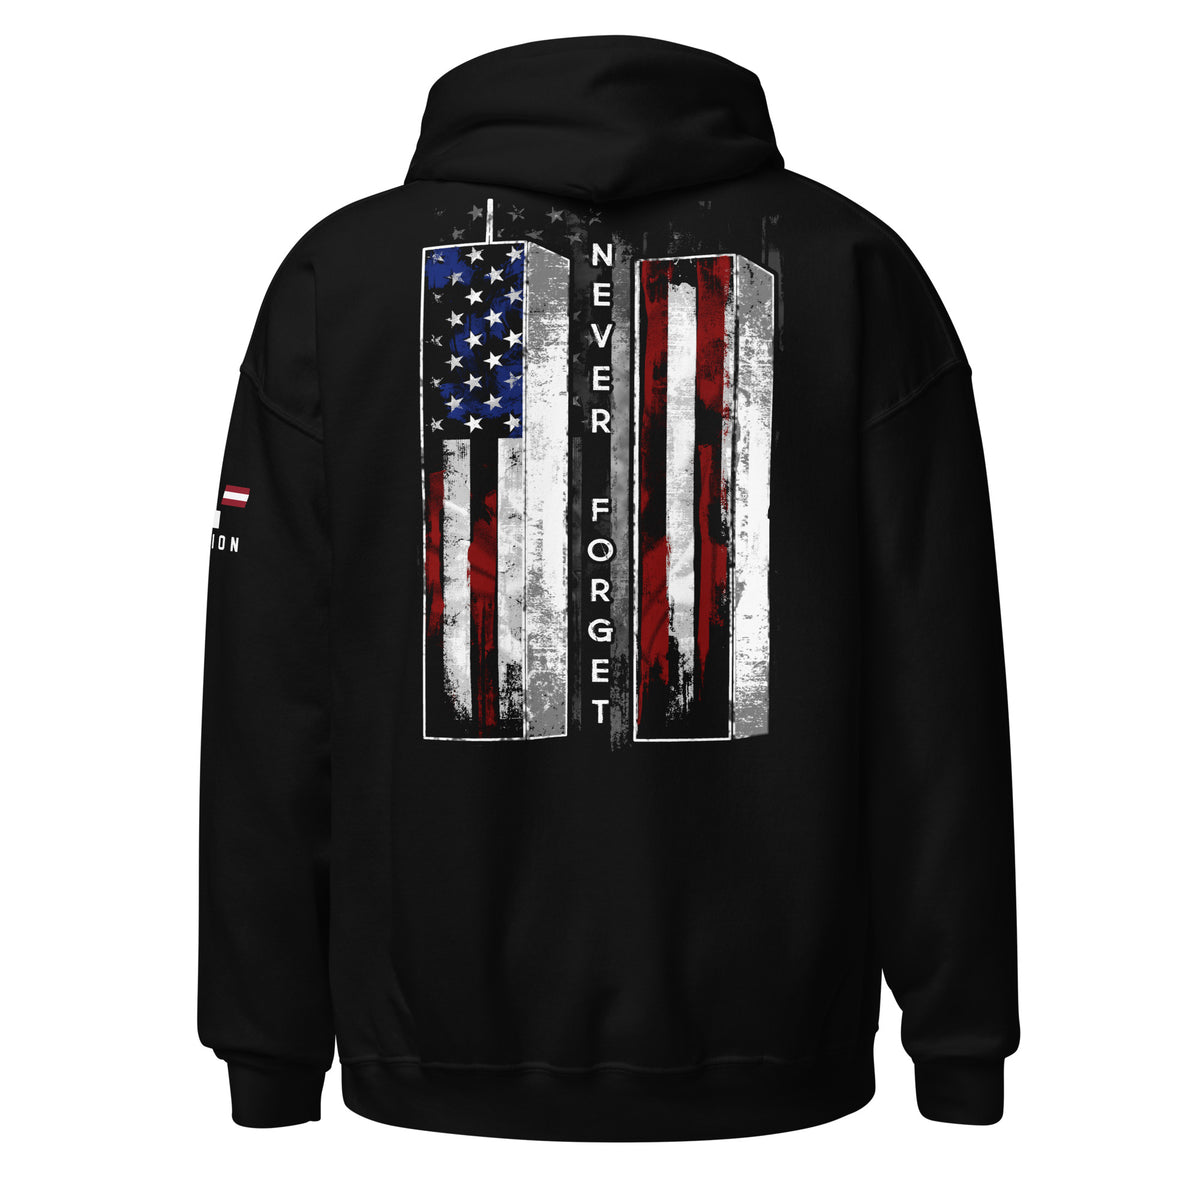 September 11th - NEVER FORGET Hoodie